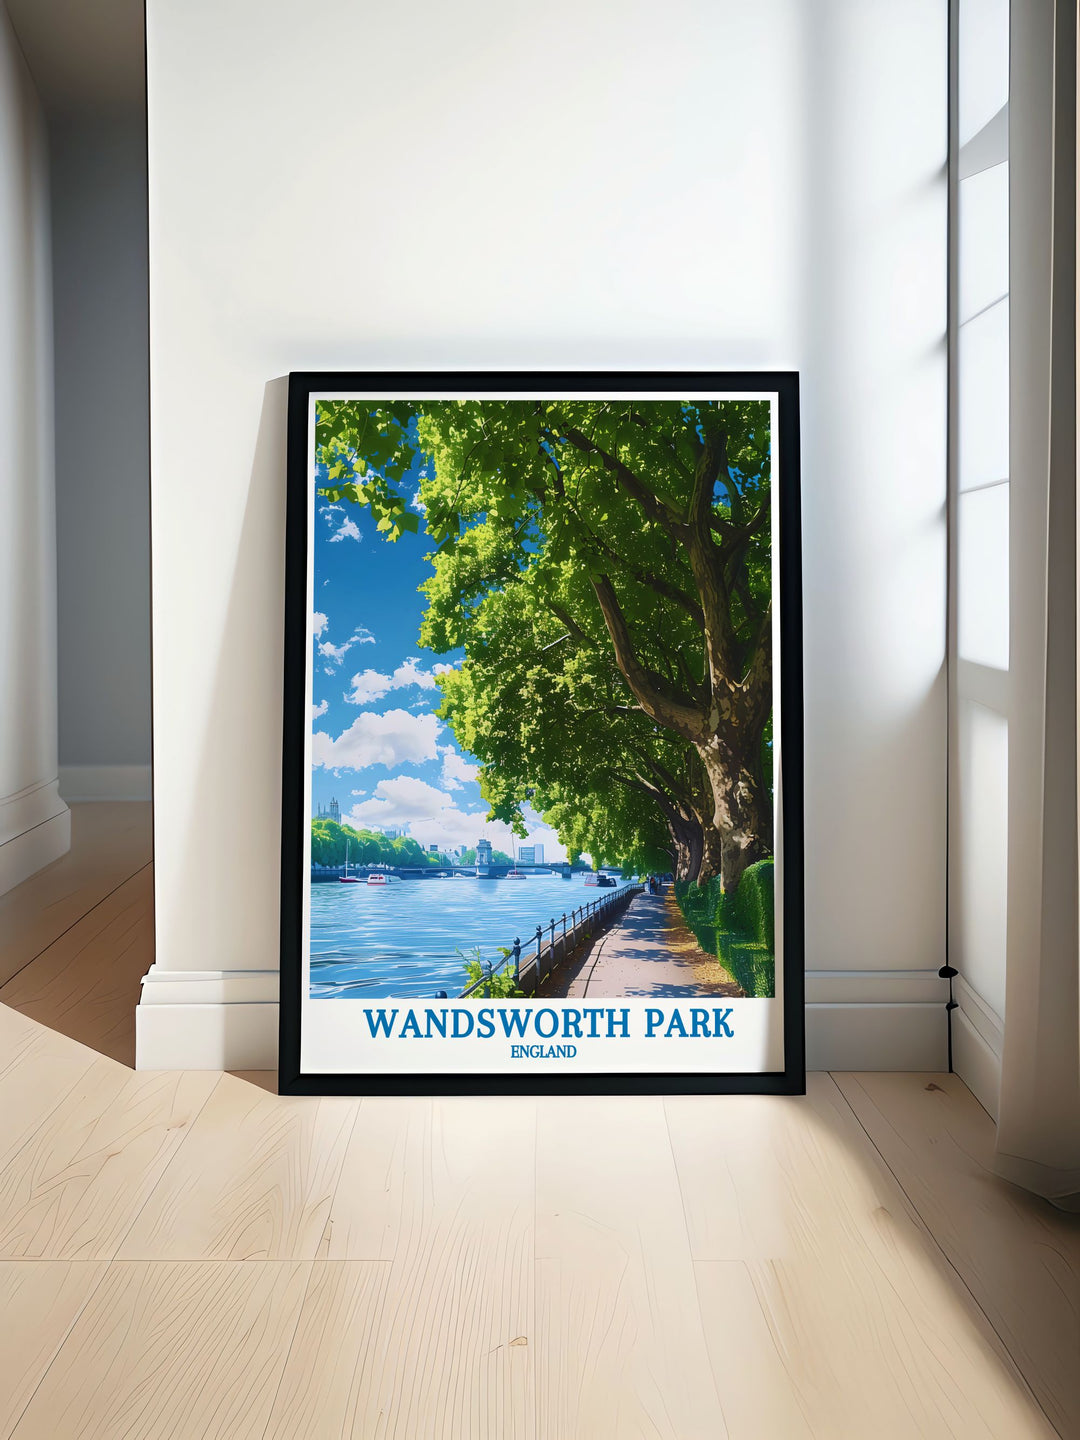 The riverside walk in Wandsworth Park is showcased in this stunning print, highlighting the parks peaceful ambiance and historical significance. Perfect for nature lovers and history enthusiasts, this artwork captures the essence of one of Londons most beloved parks, making it a timeless addition to any art collection or home decor.